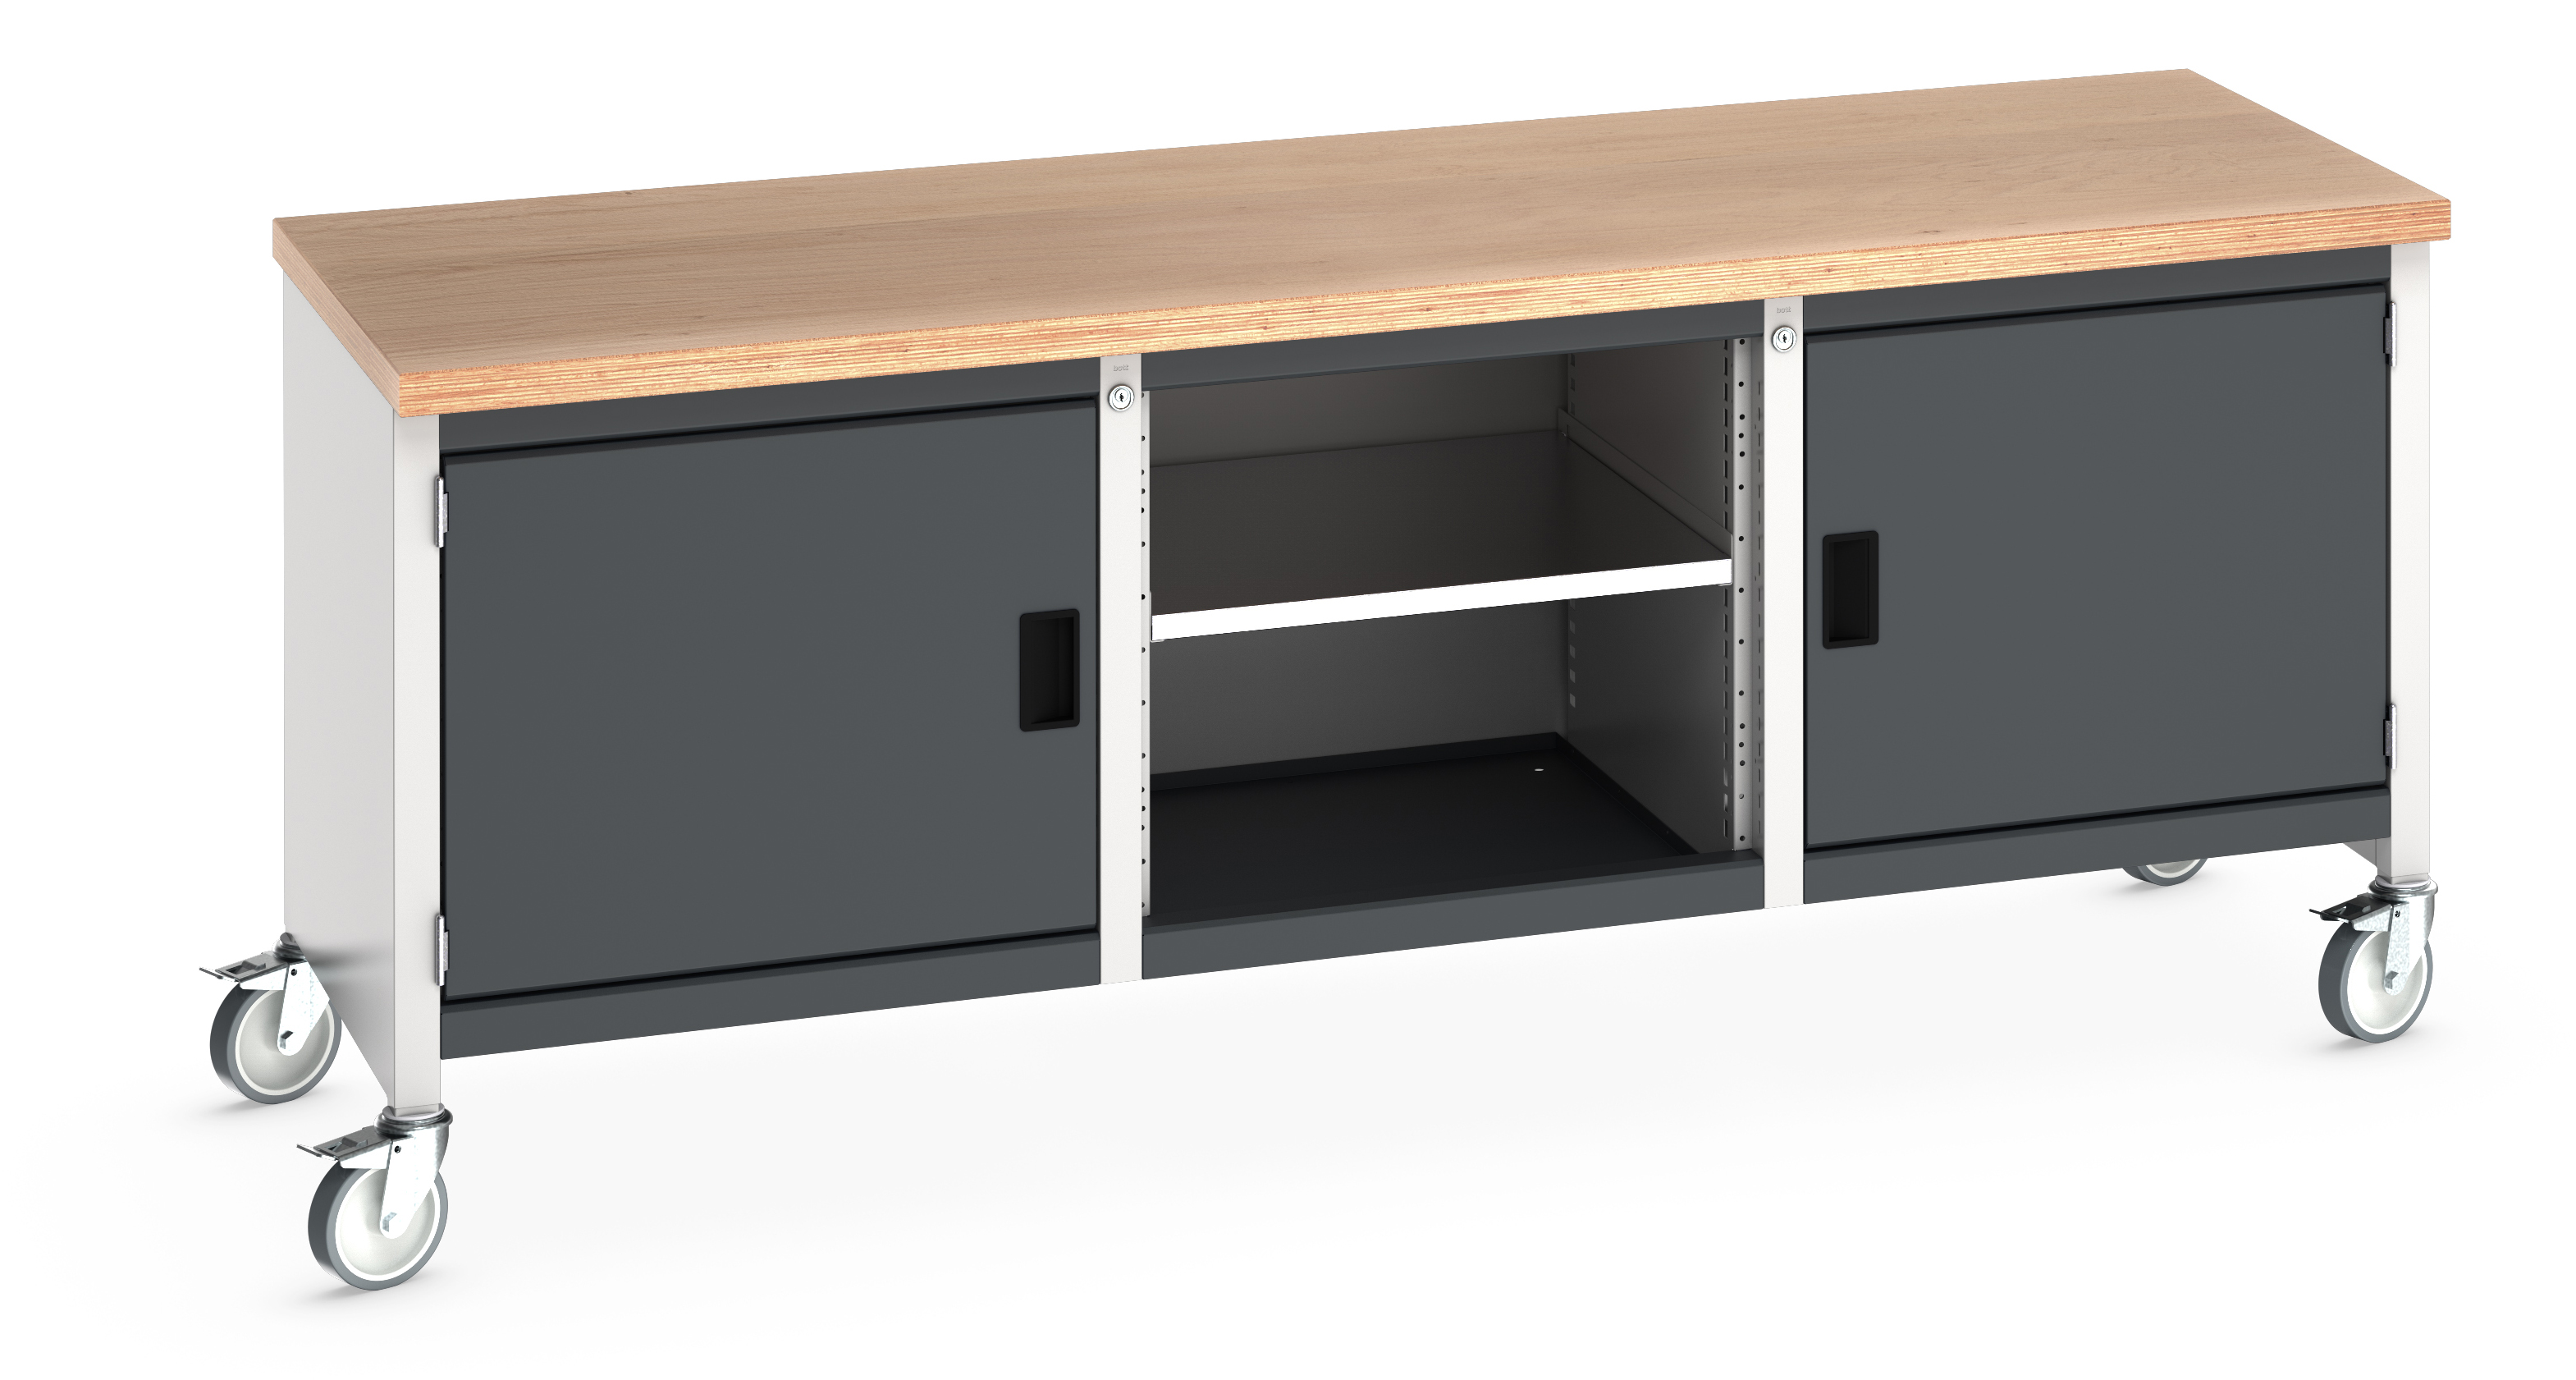 Bott Cubio Mobile Storage Bench With Full Cupboard / Open Cupboard /Full Cupboard - 41002118.19V